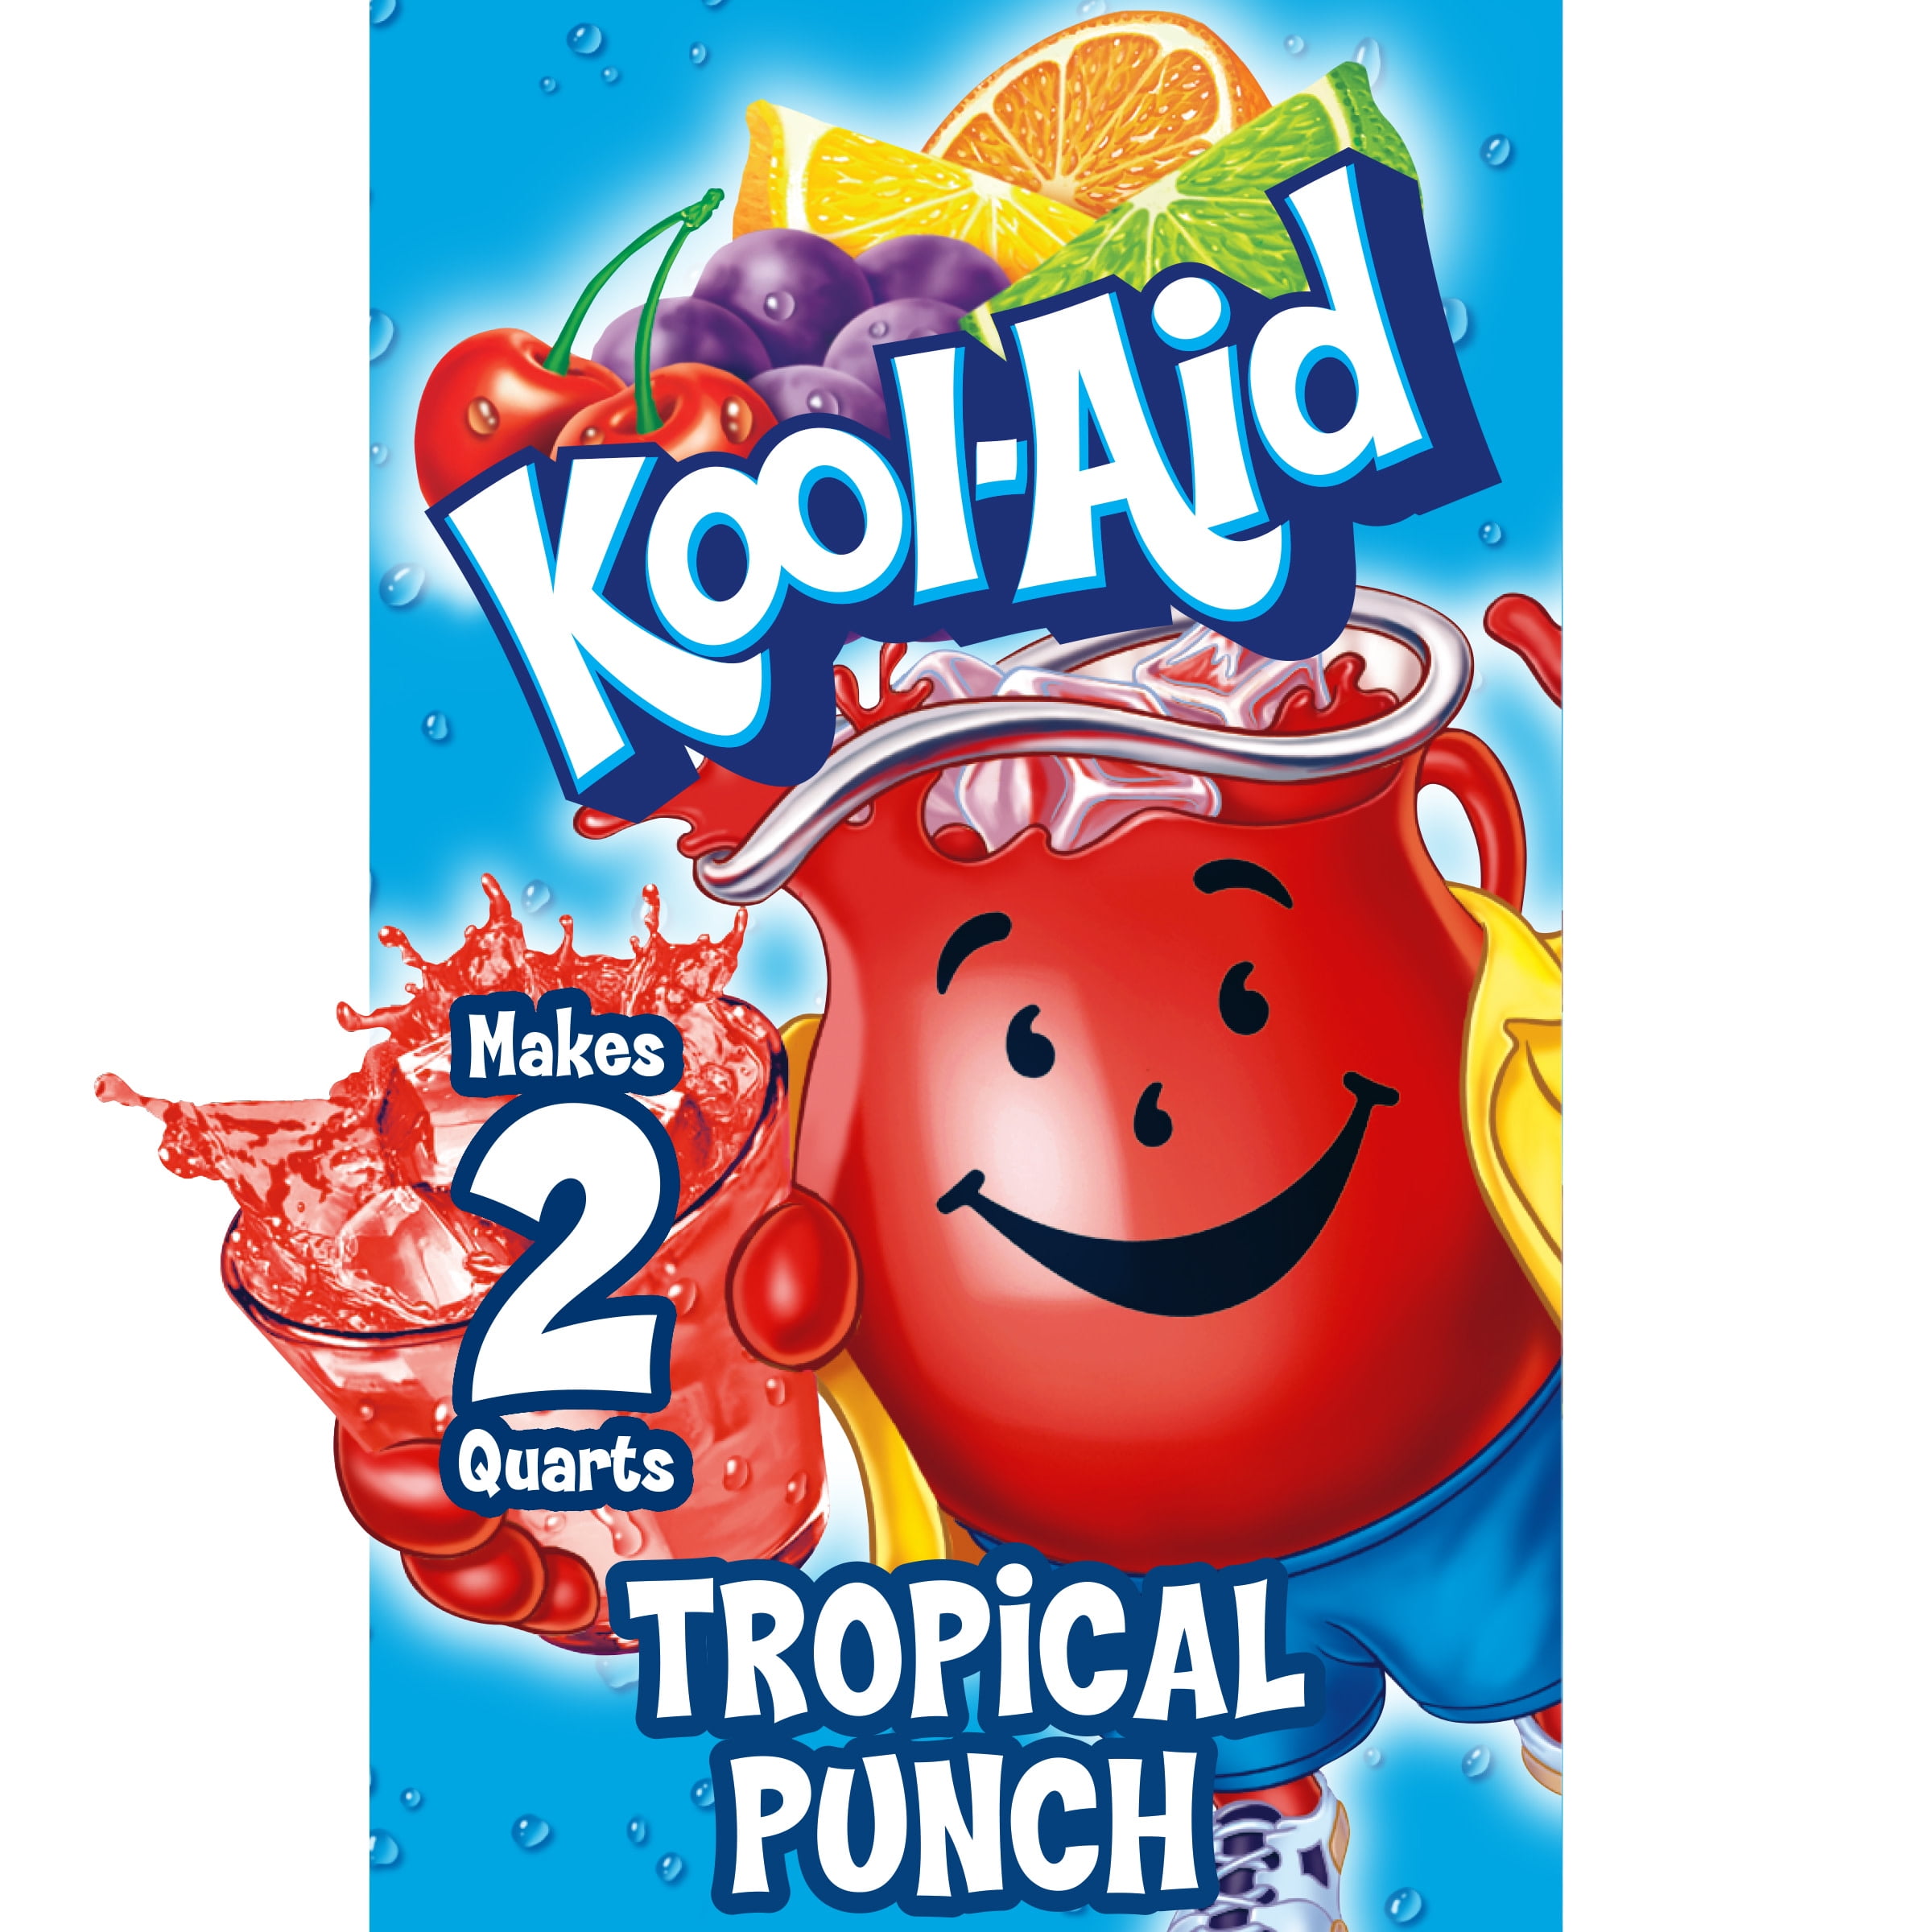 Kool-Aid Unsweetened Tropical Punch Artificially Flavored Powdered Drink Mix, 0.16 oz. Packet